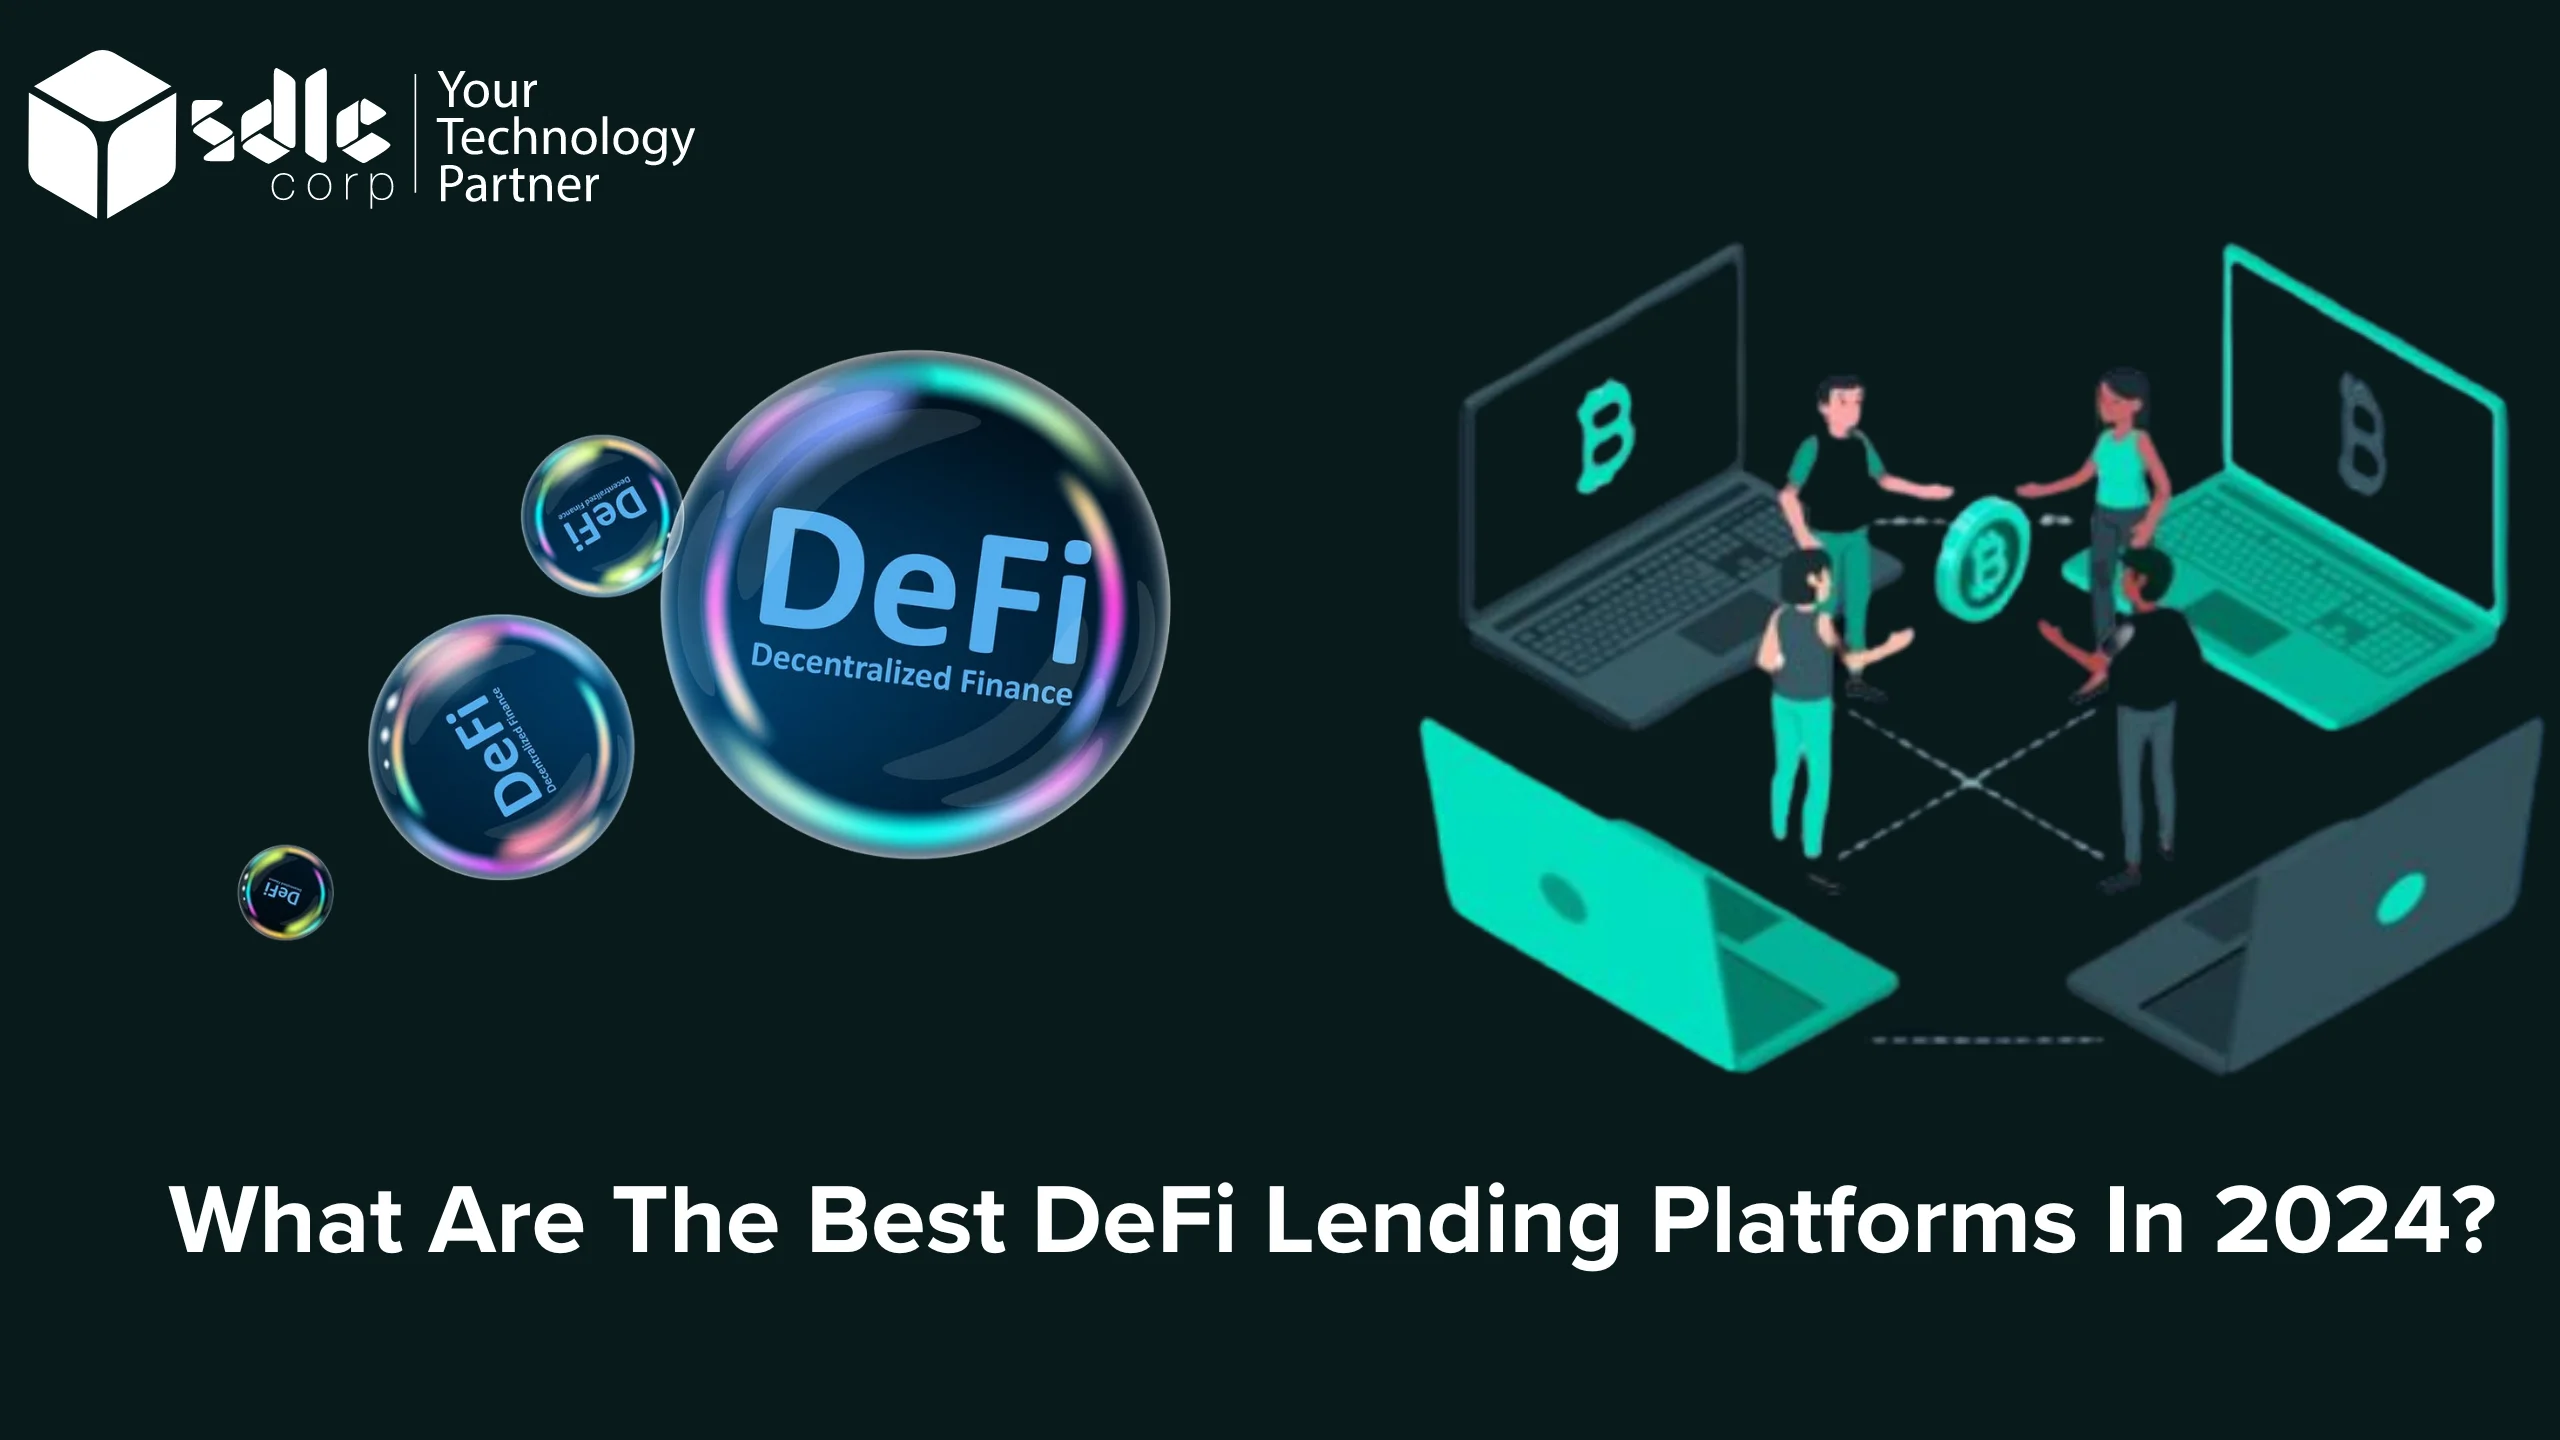 What Are The Best DeFi Lending Platforms In 2024